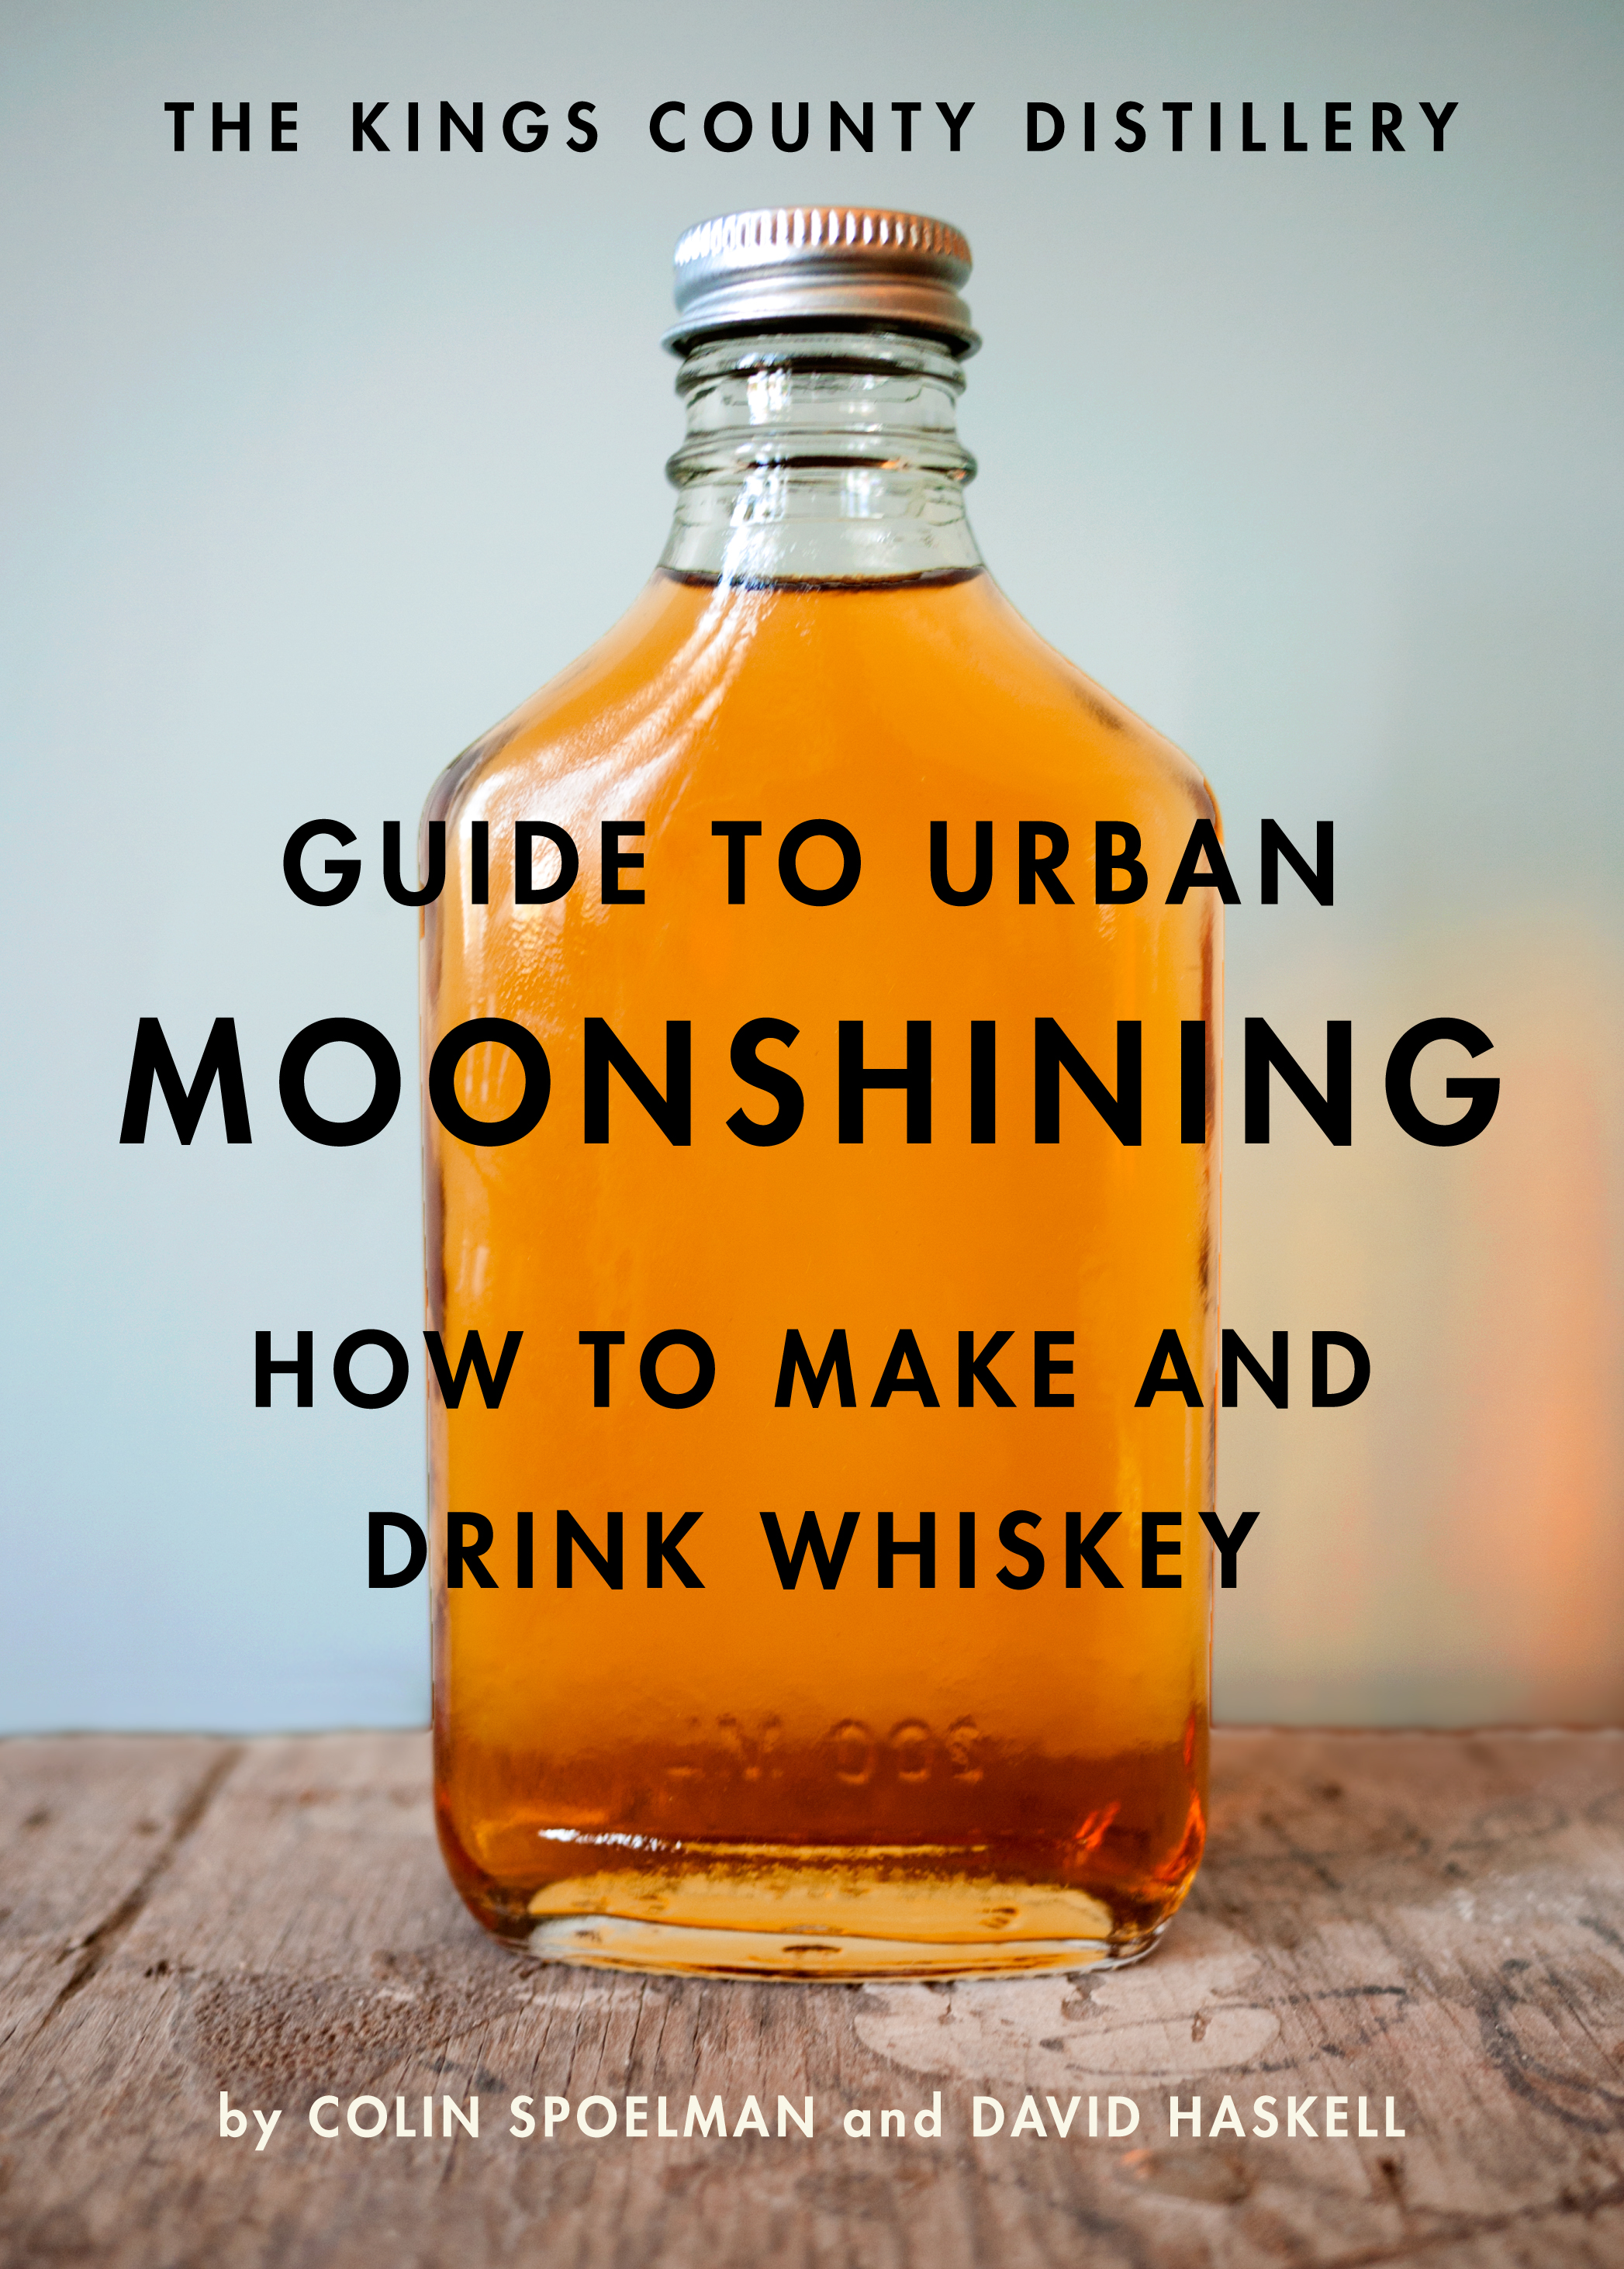 Book Launch: The Kings County Distillery Guide to Urban Moonshining by Colin Spoelman and David Haskell